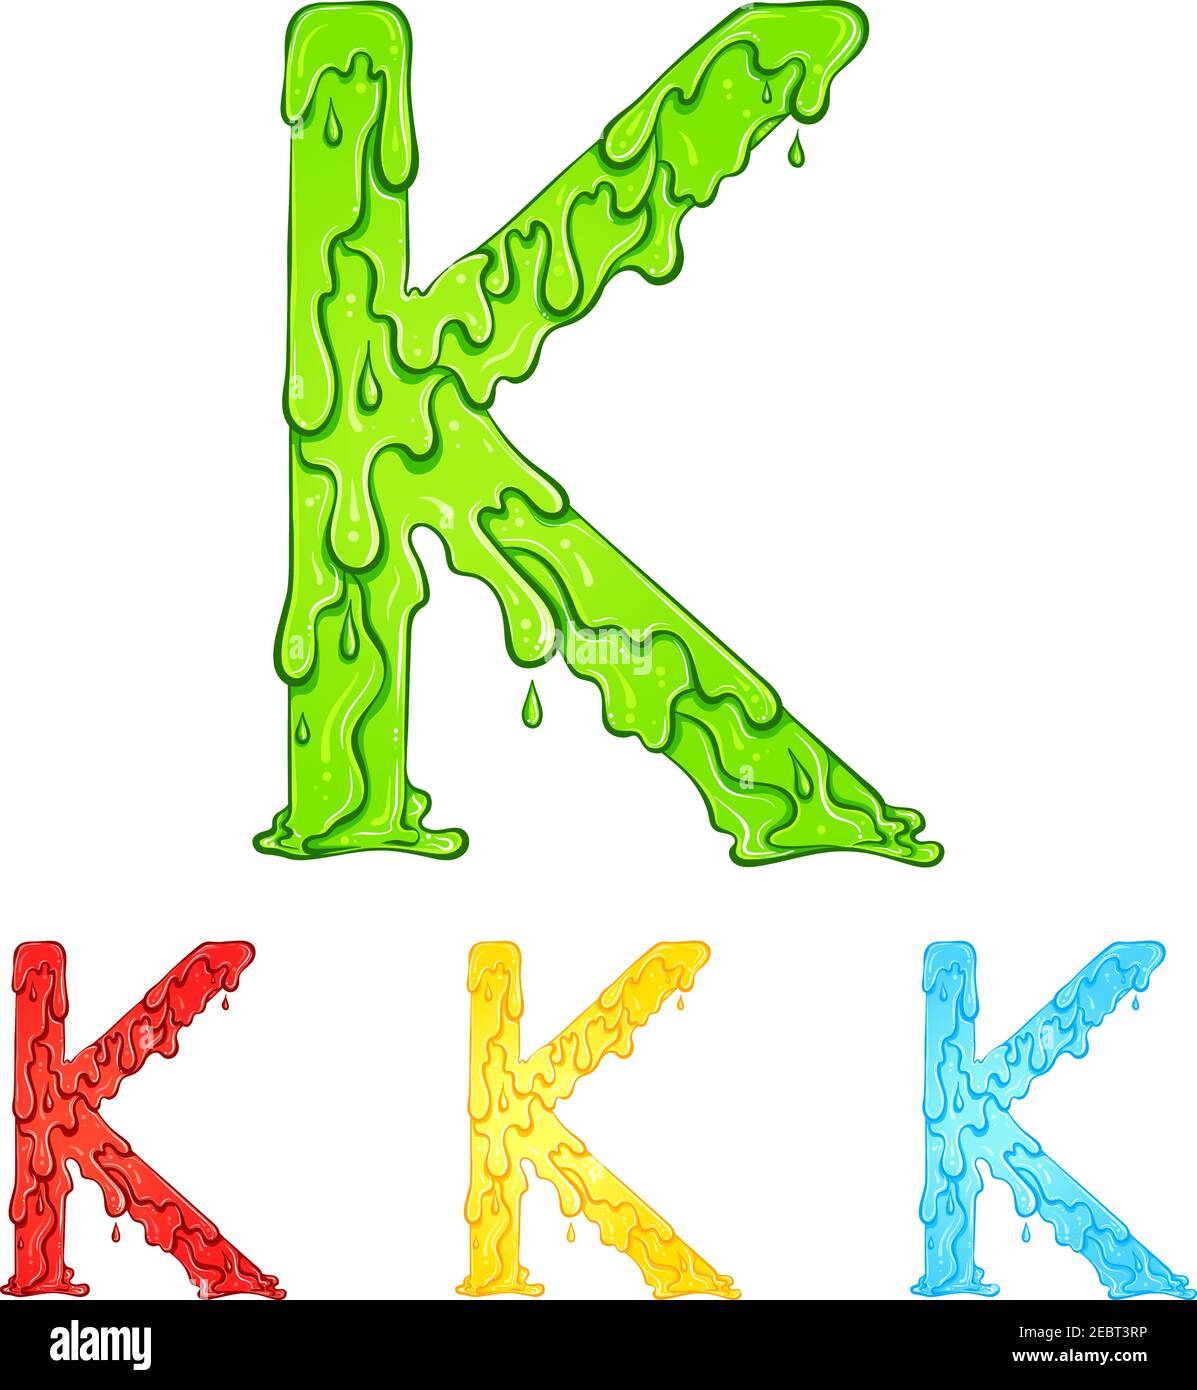 Letter K with flow drops and goo splash. Color illustration of the symbol k in four colors green, red, yellow, blue. Dripping liquid. Vector font in hand drawn style isolated on white background. Stock Vector